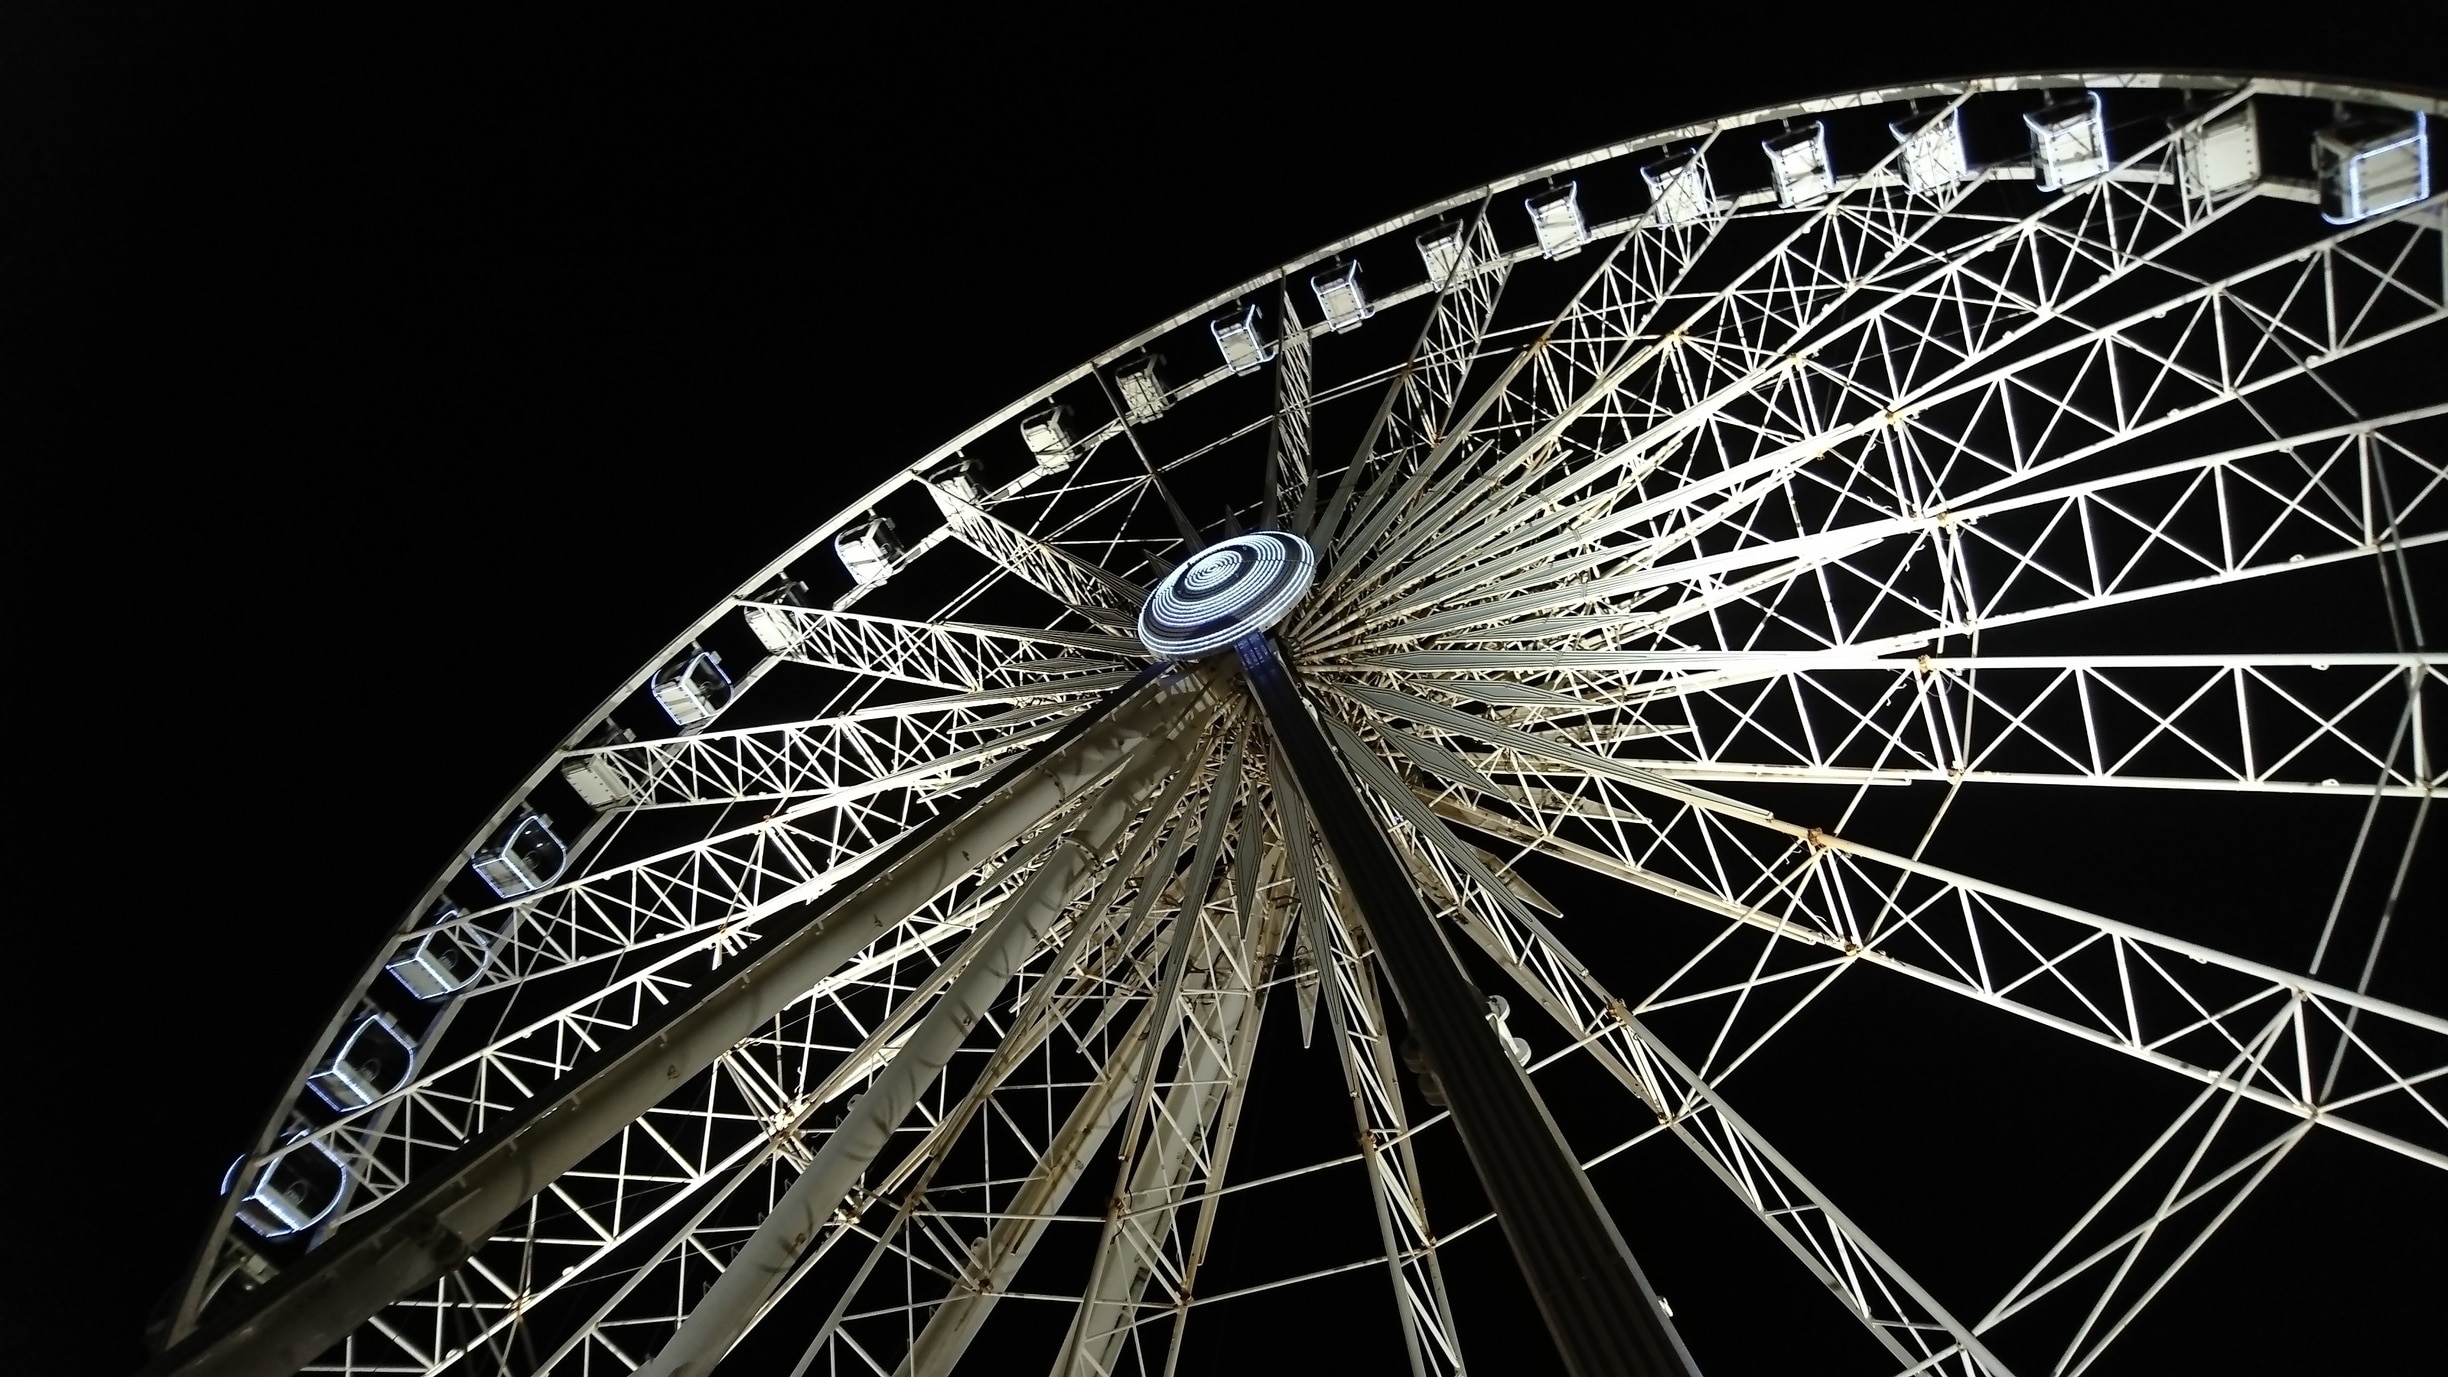 The big wheel in the square outside echo arena